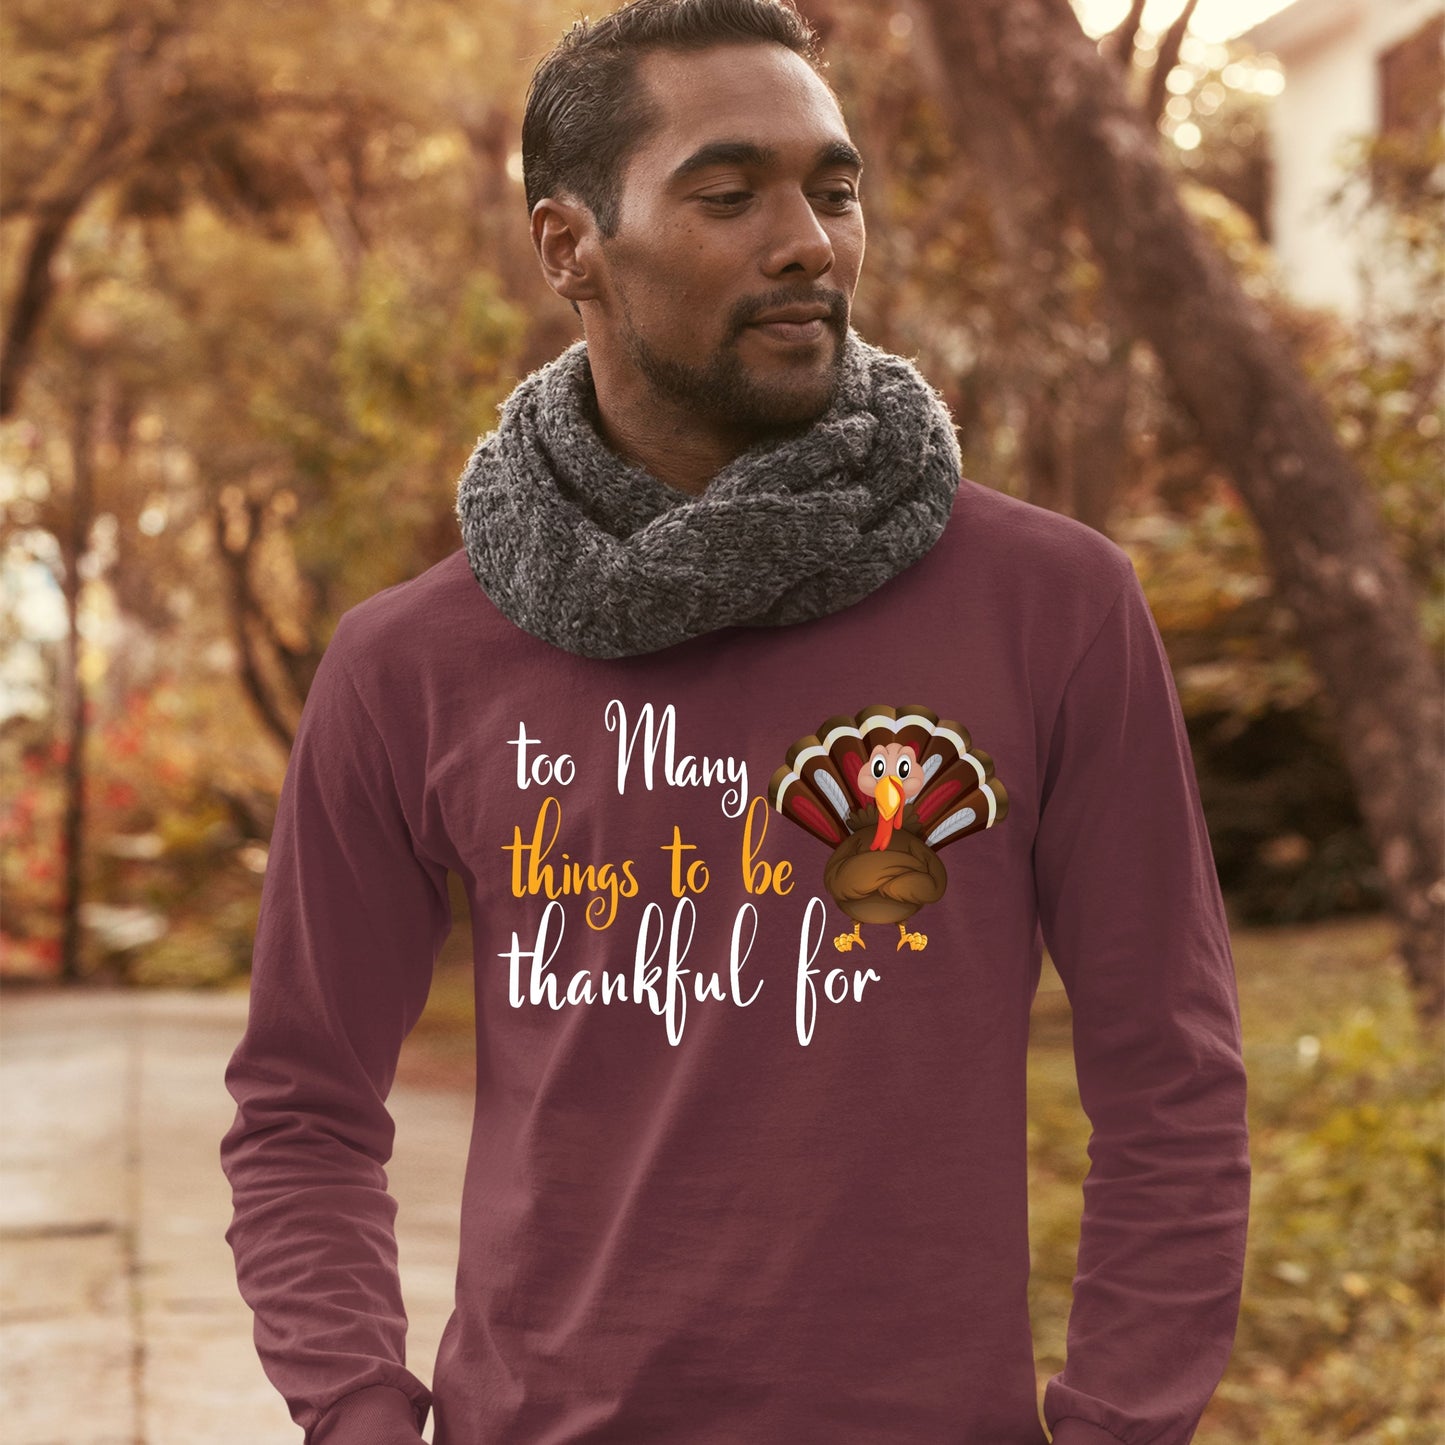 Too Many Things To Be Thankful For, Thanksgiving Sweatshirt, Thanksgiving Sweater for Men, Thanksgiving Gift Ideas, Cute Thanksgiving